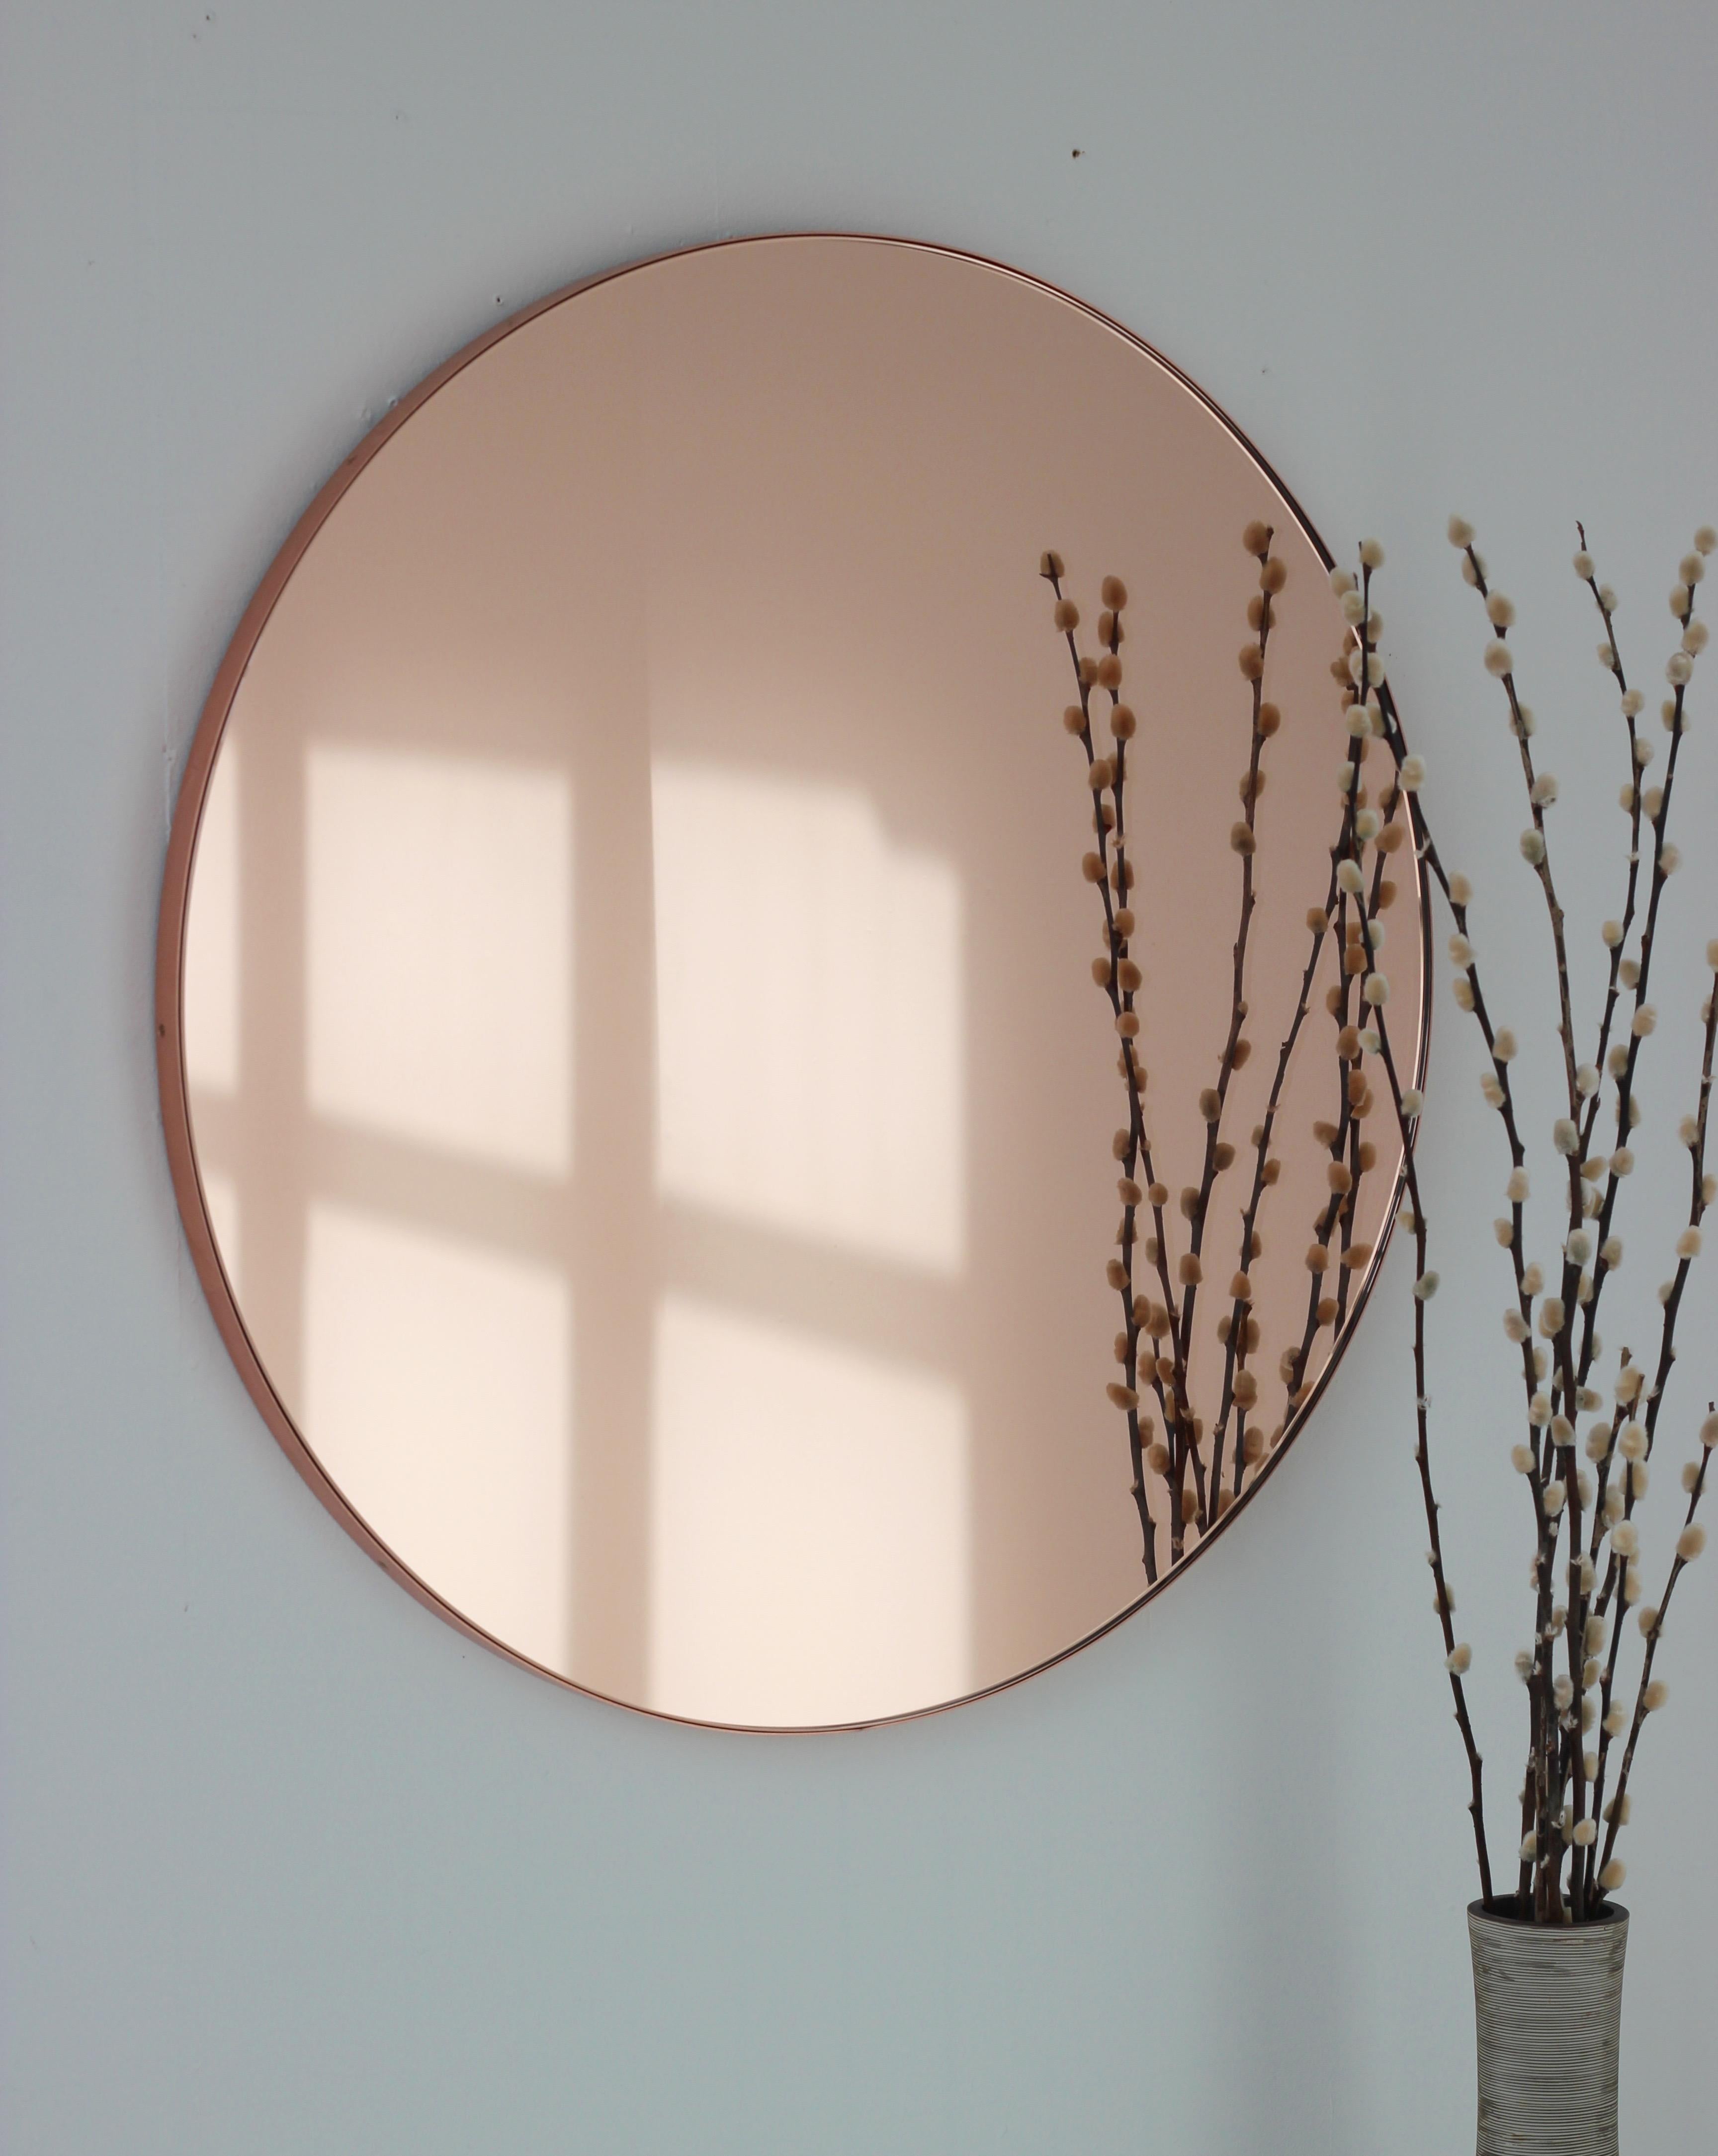 Contemporary Peach / Rose Gold tinted Orbis™ round mirror with a brushed copper frame. The detailing and finish, including visible copper plated screws, emphasise the craft and quality feel of the mirror. Designed and handcrafted in London, UK.

Our